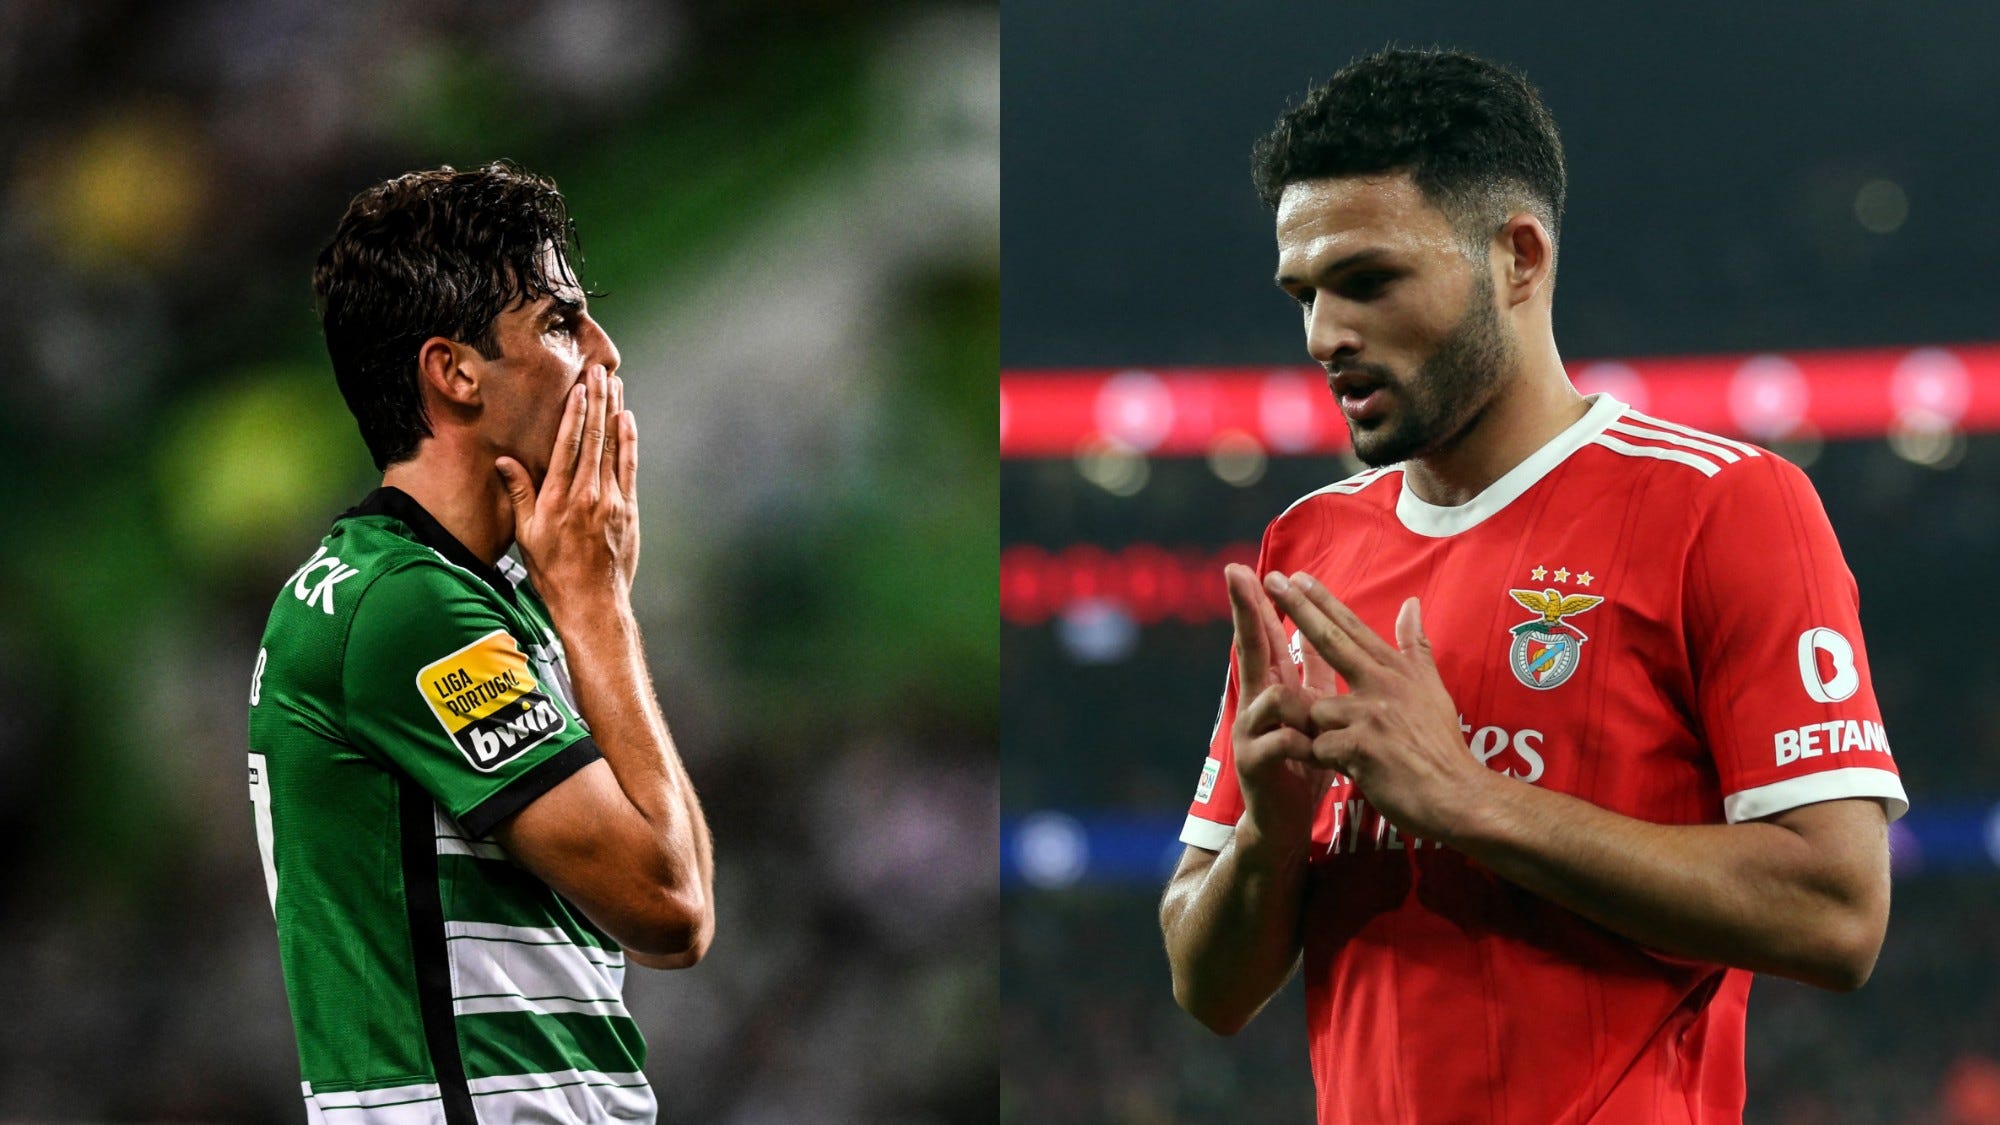 Sporting Lisbon – Benfica: all the practical information